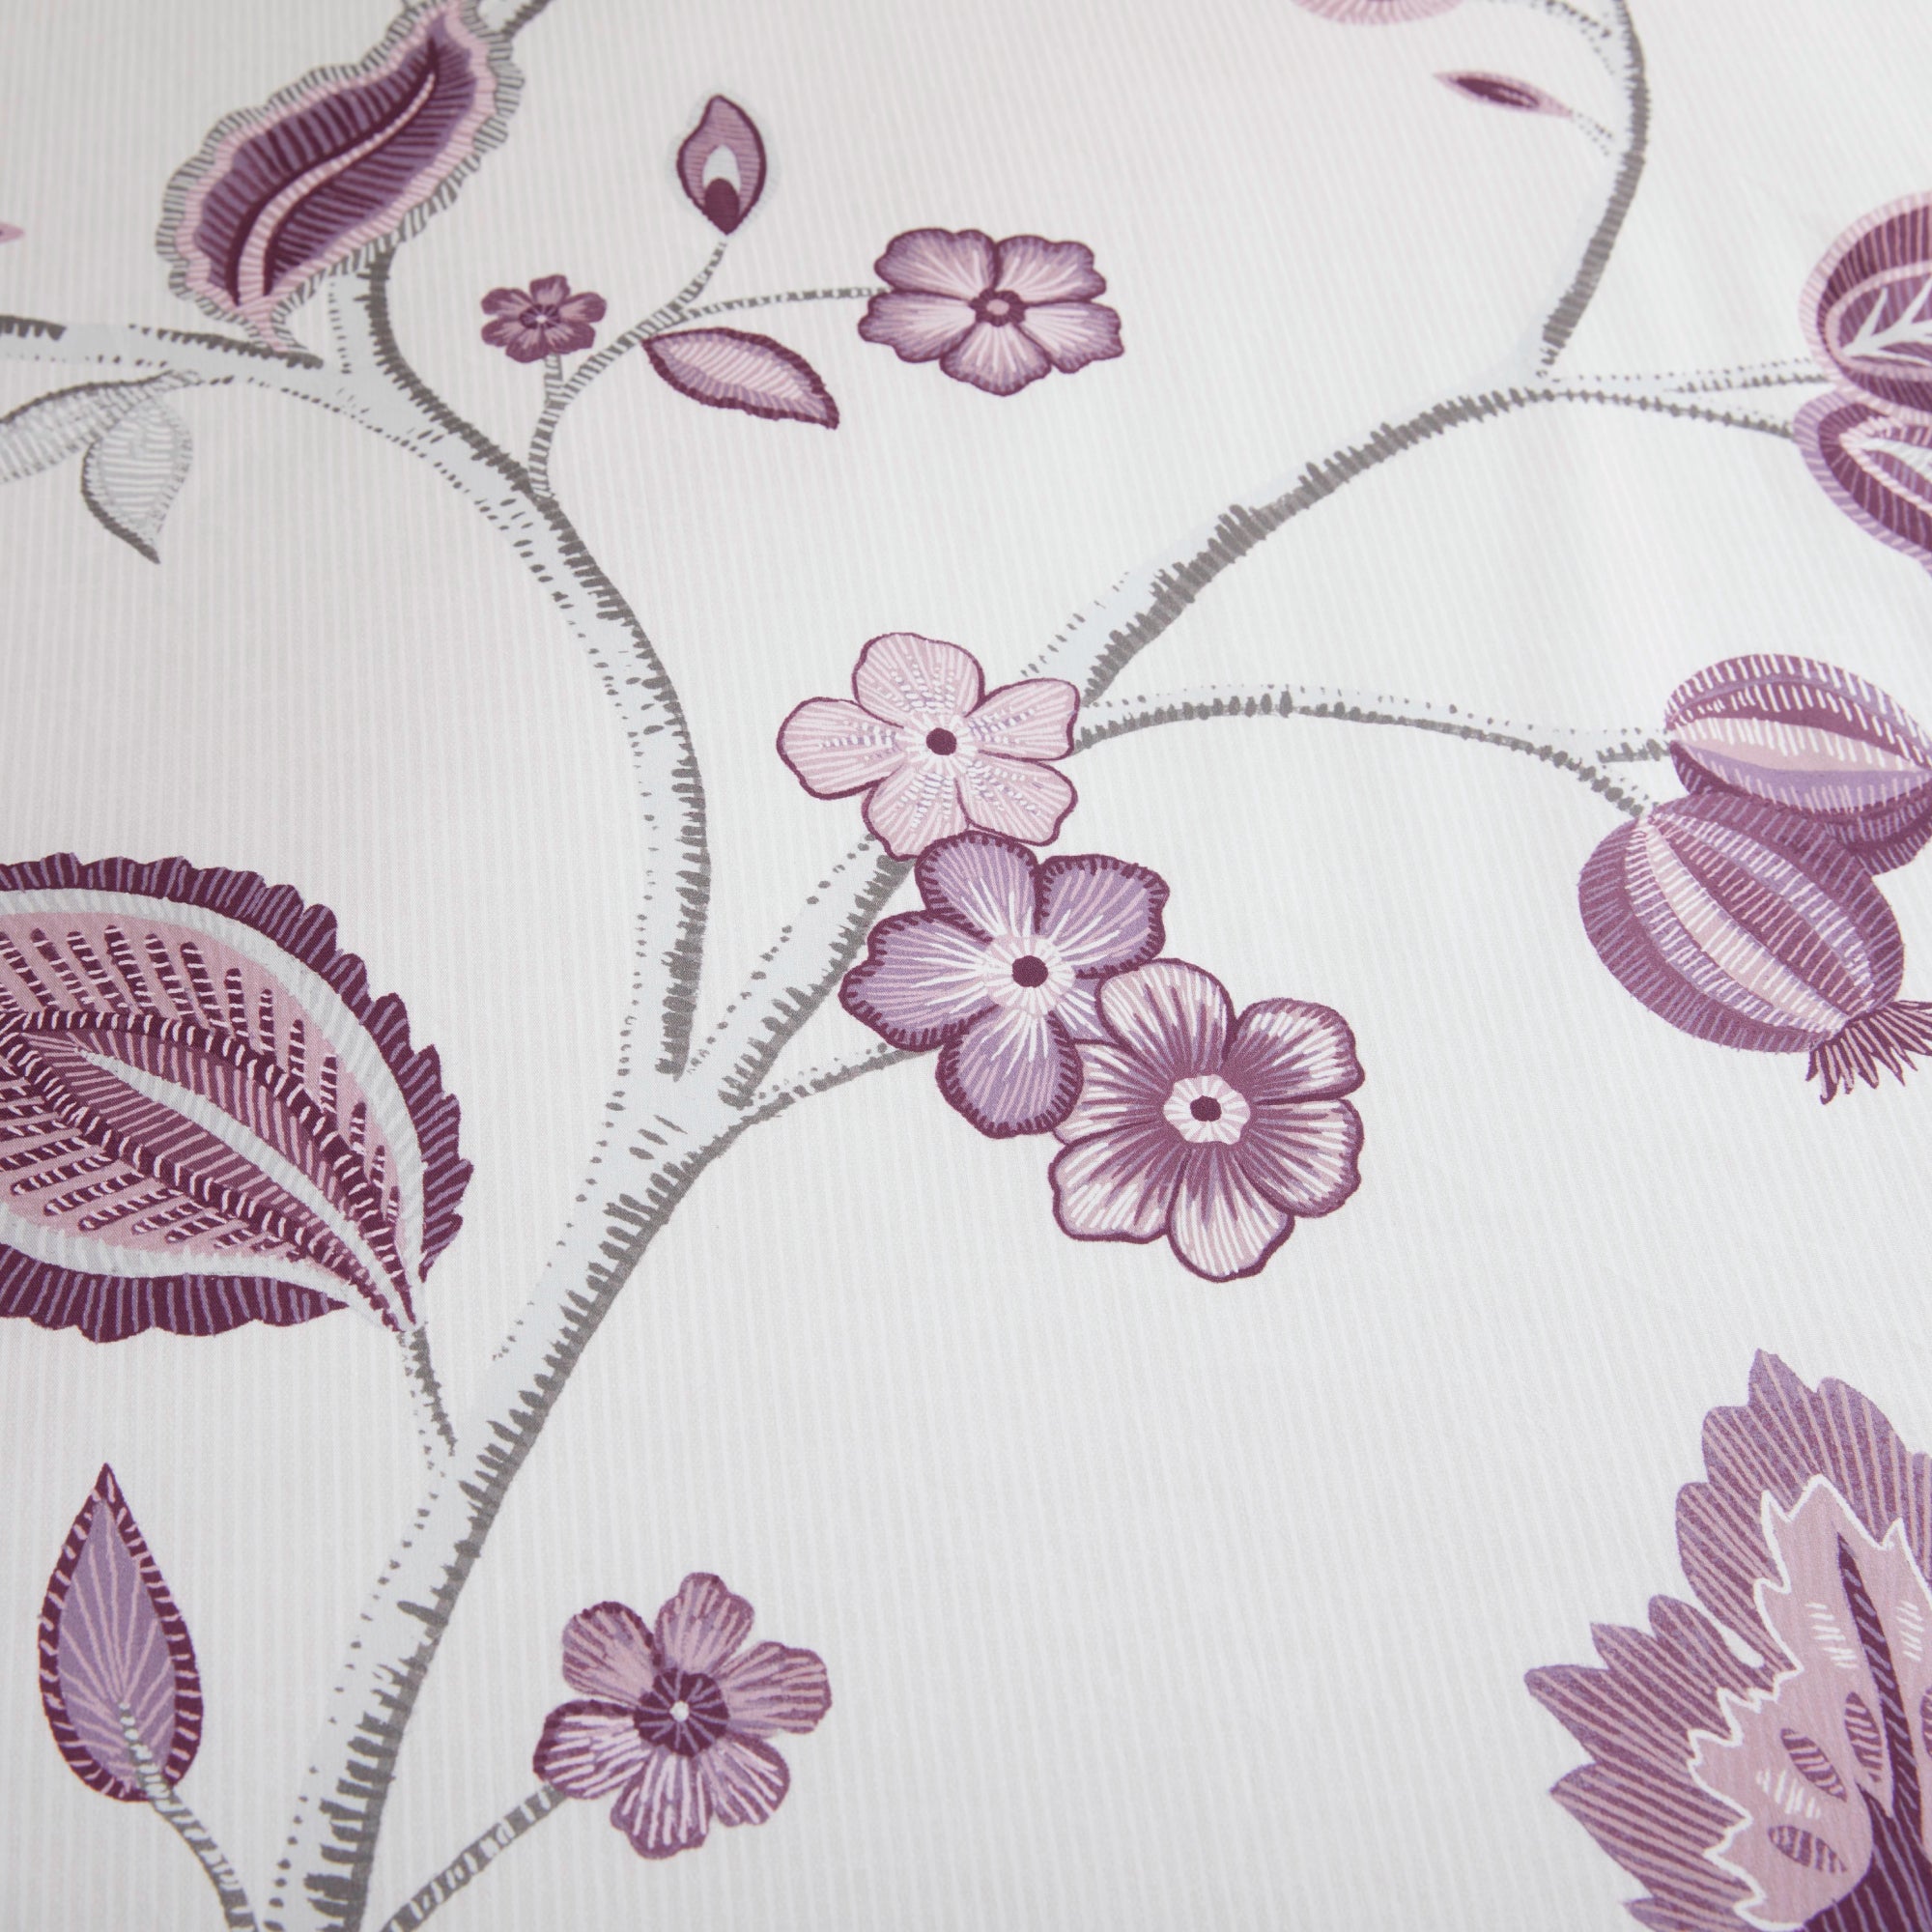 Duvet Cover Set Samira by Dreams And Drapes Design in Plum